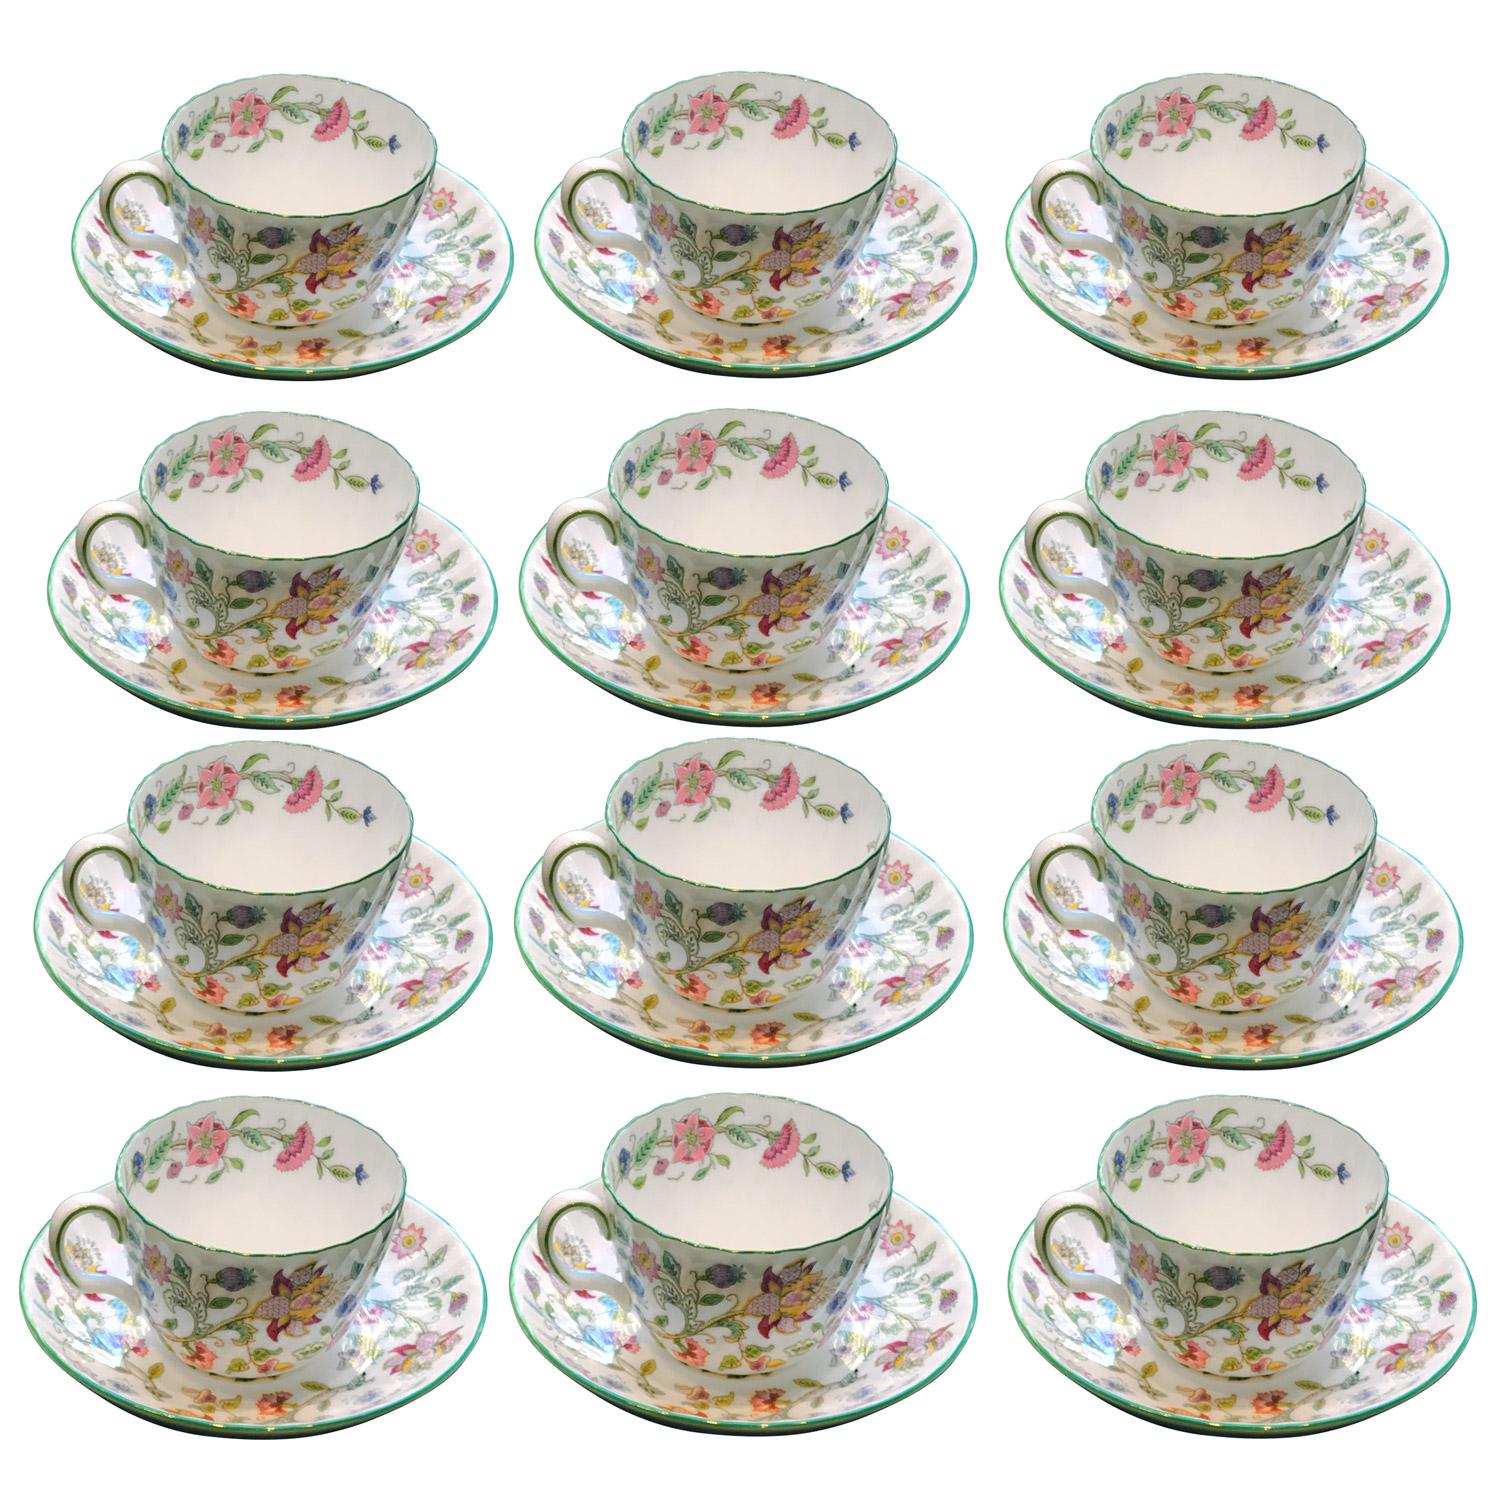 Set of 12 teacups and with their saucers in Minton Bone China Porcelain. Famous Minton Haddon Hall model designed by John William Wadsworth (1879–1955), recognizable with its fluted body and white background decorated with colorful flowers such as